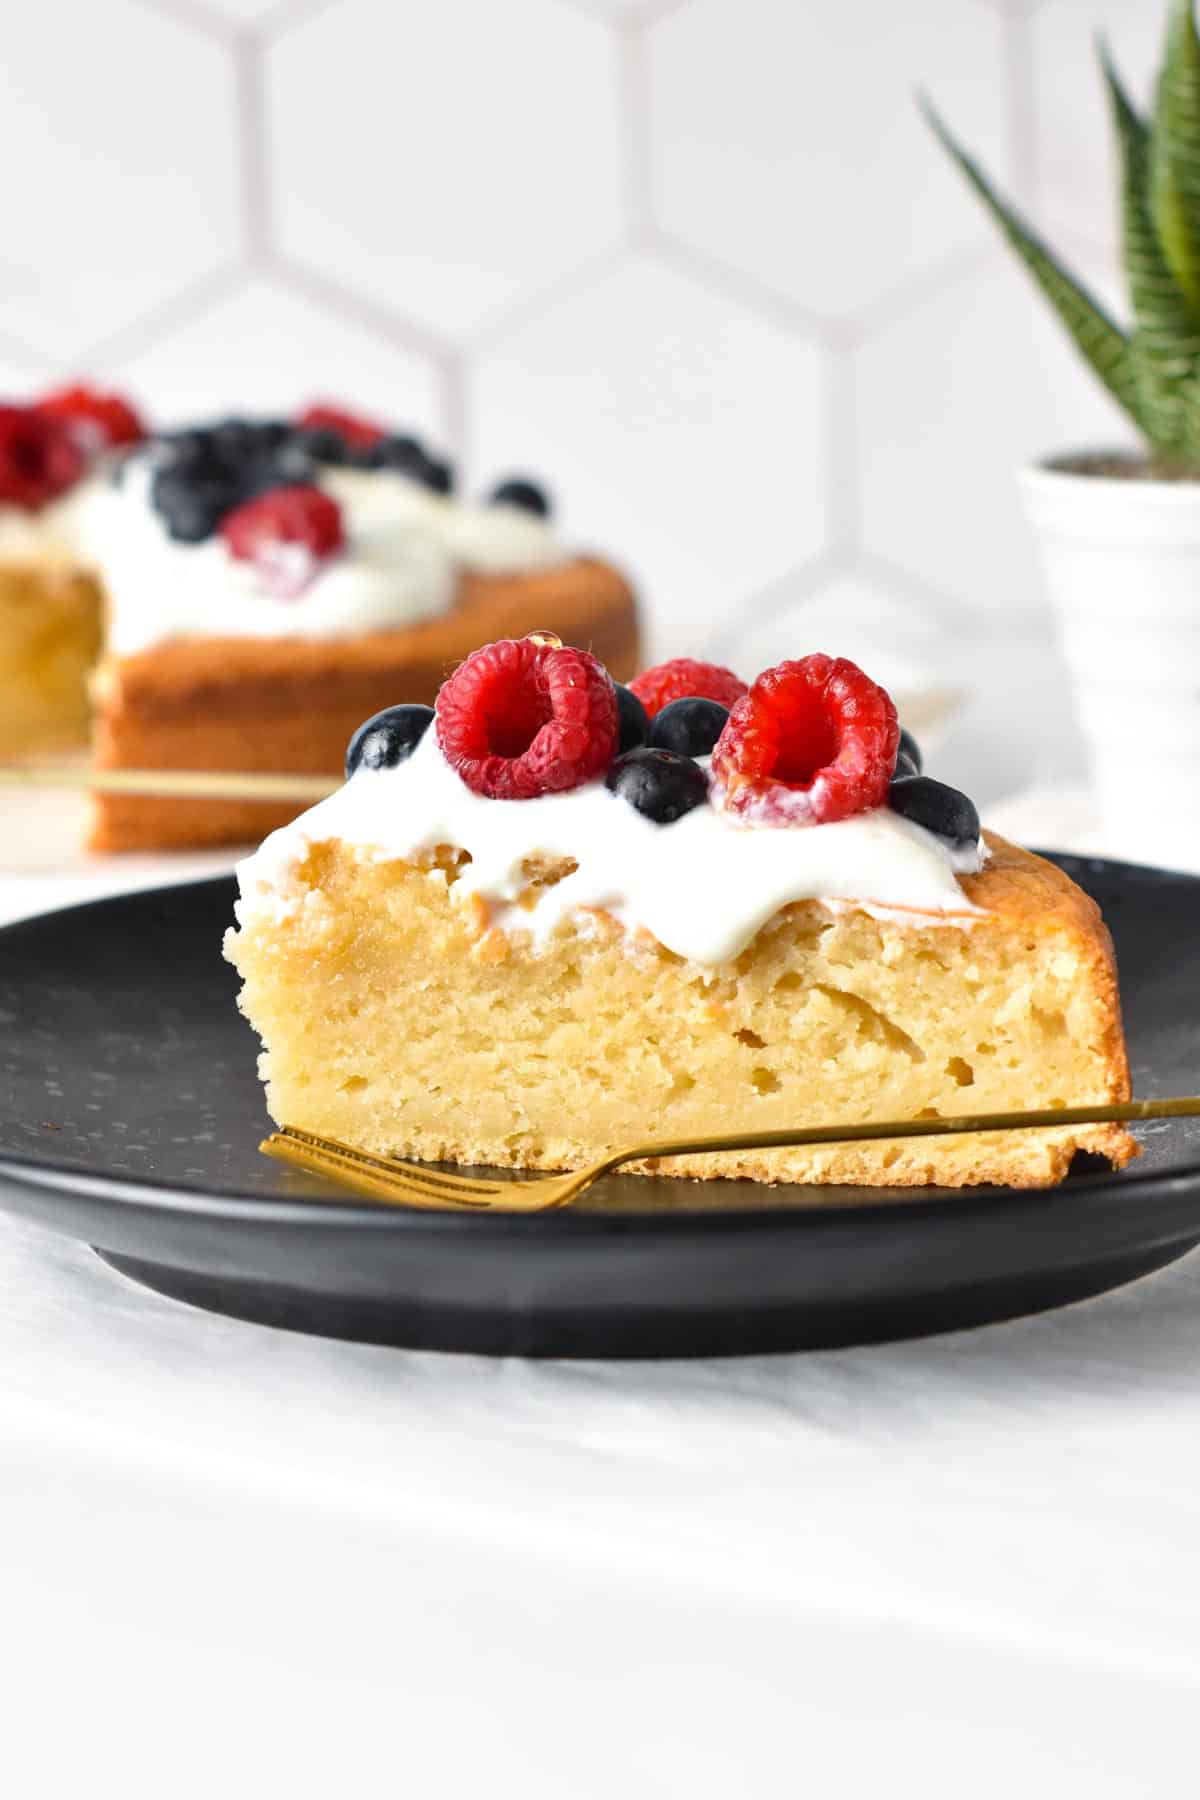 This sugar-free cake is a deliciously moist vanilla cake made with simple ingredients and with only 1 g of sugar per serve. Plus, this cake is also egg-free, dairy-free, and suitable for anyone.